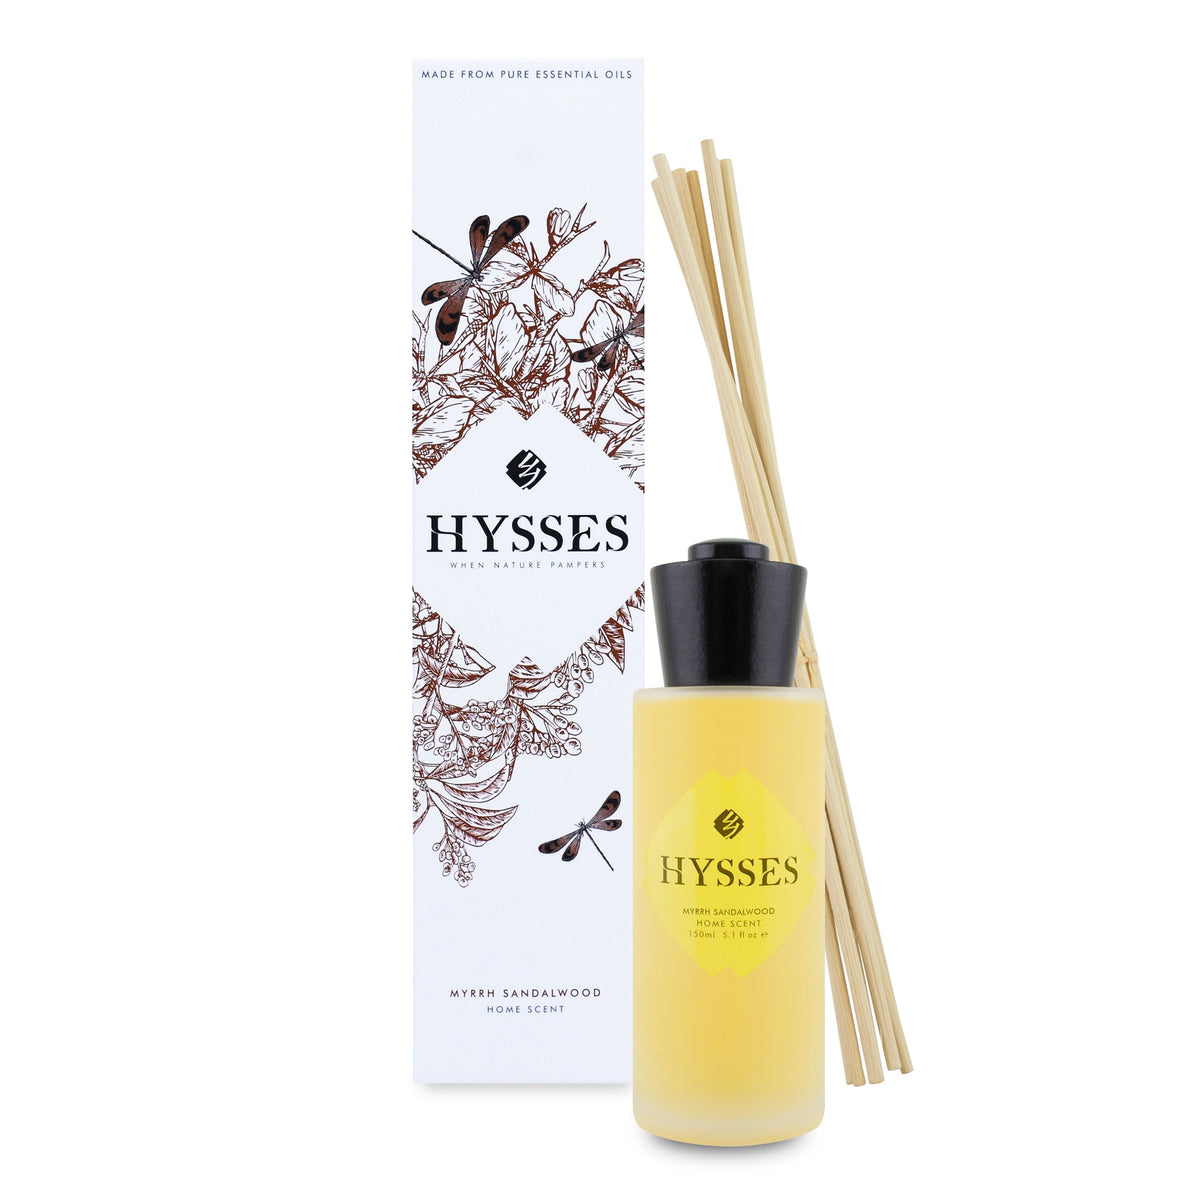 Hysses Home Scents 150ml Home Scent Reed Diffuser Myrrh Sandalwood